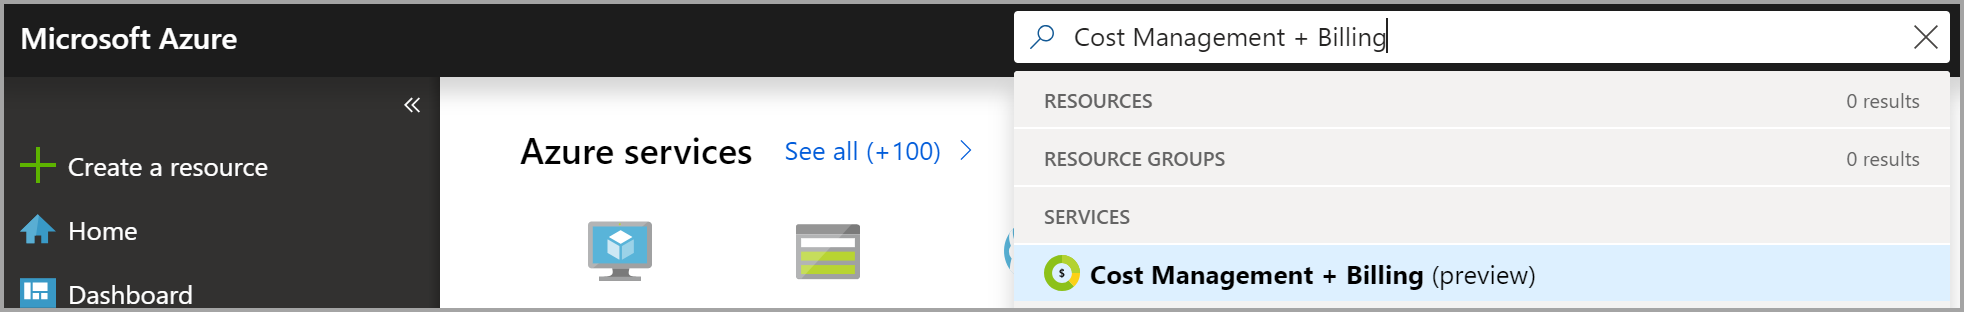 Screenshot shows Azure portal search for Cost Management + Billing.